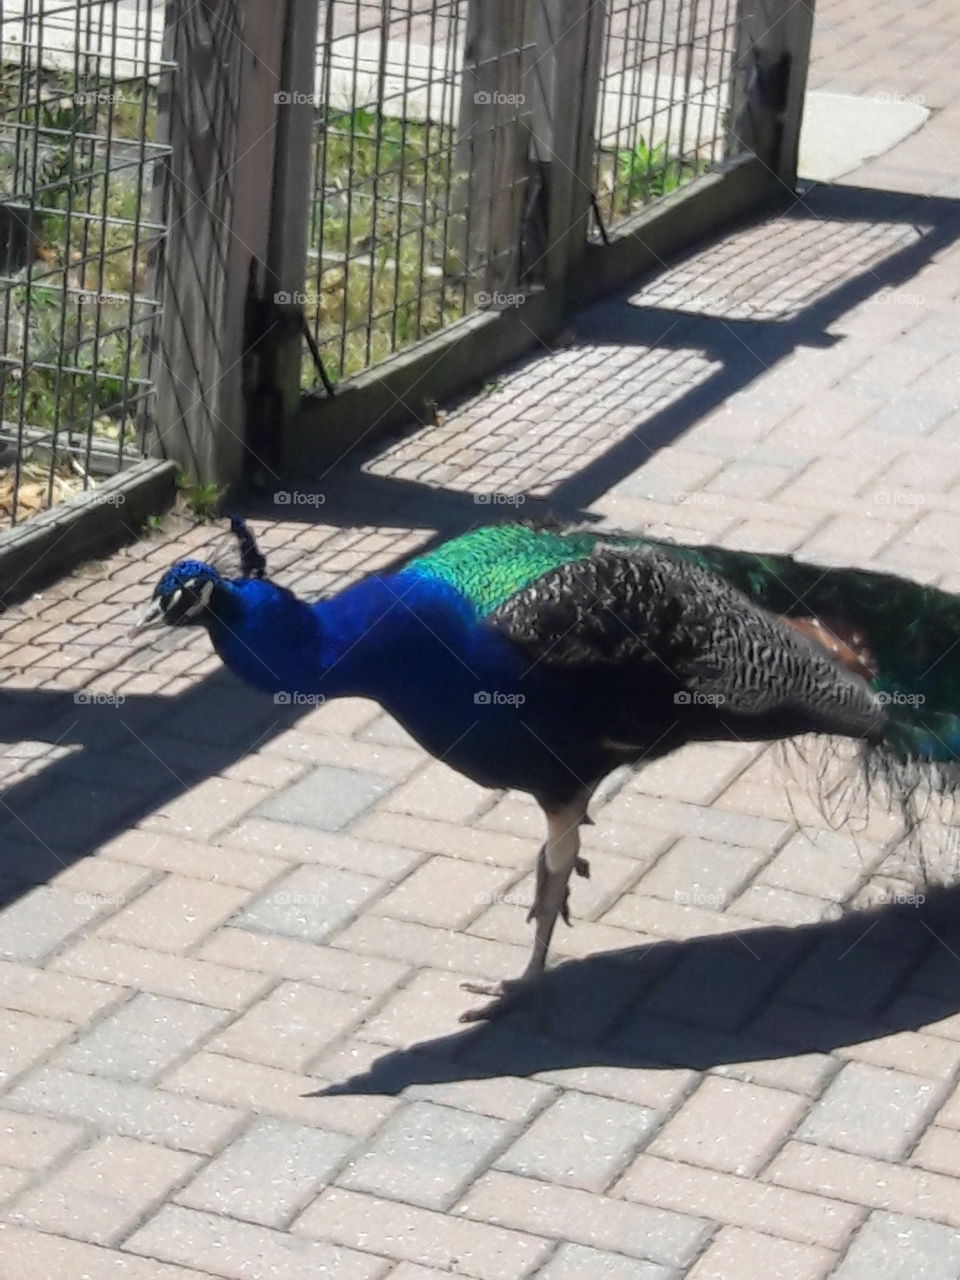 betty peacock on the move